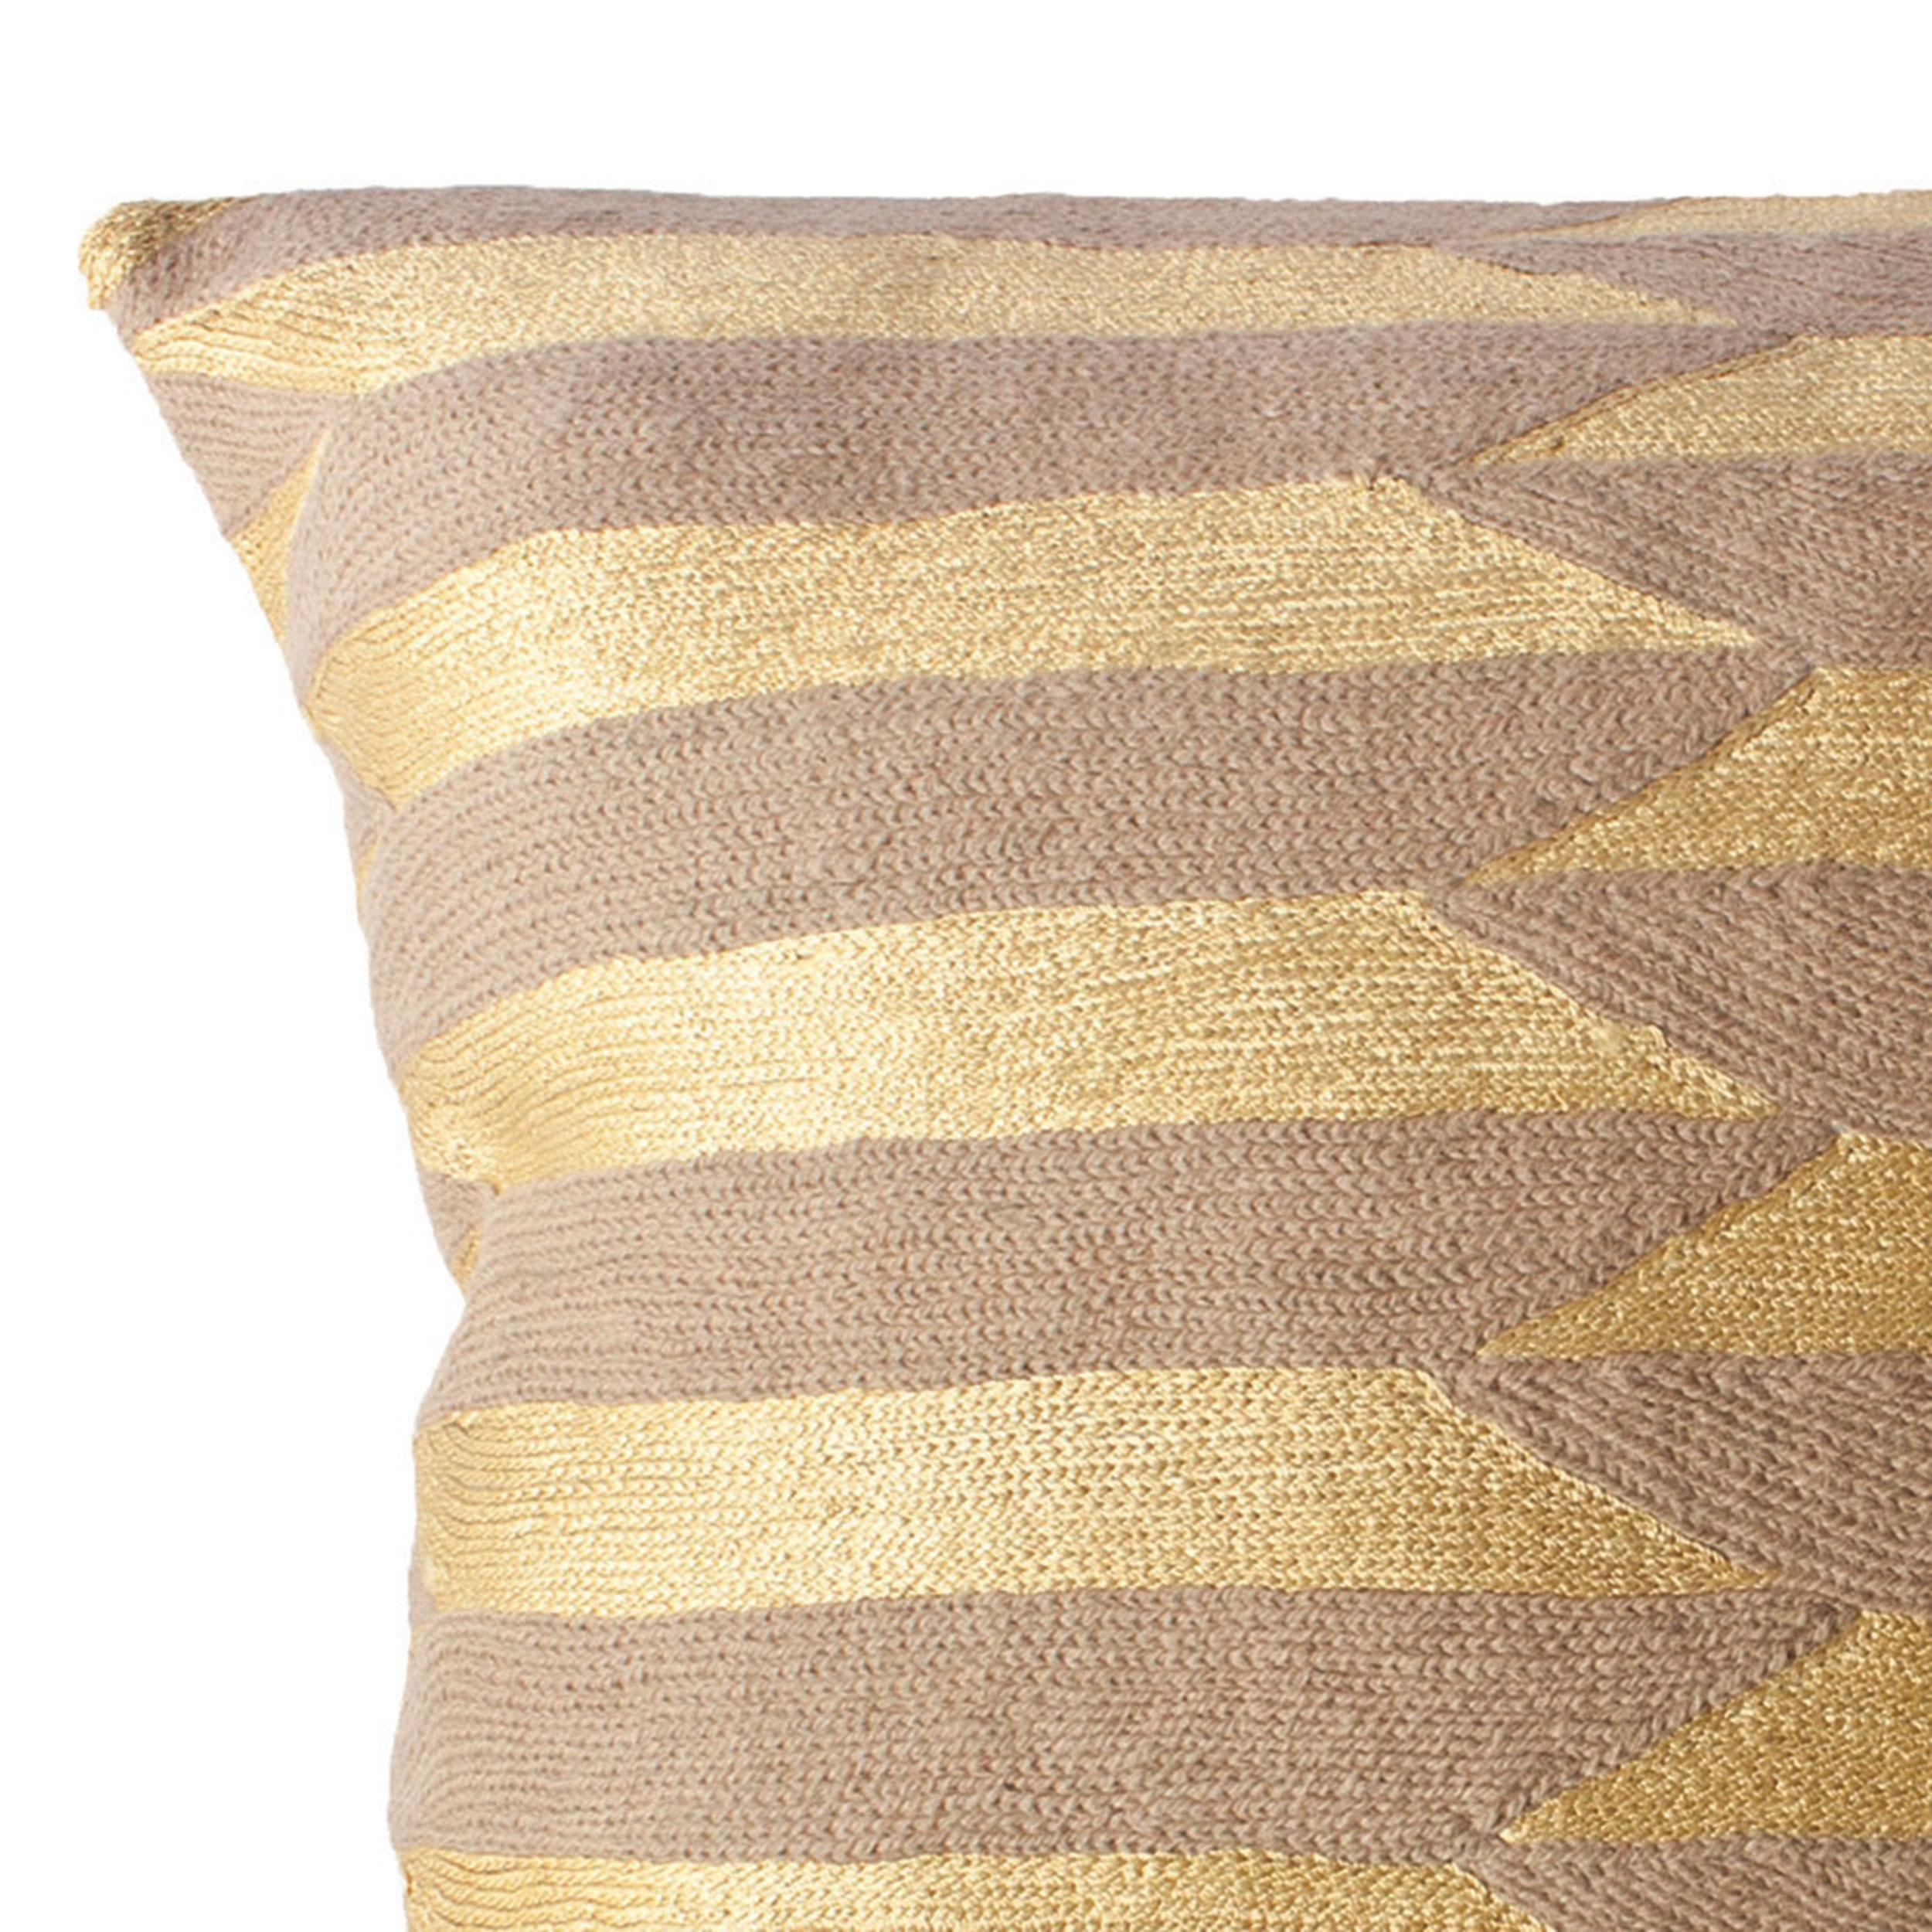 This striped throw pillow has been ethically hand embroidered by artisans in Kashmir, India, using a traditional embroidery technique which is native to this region.

The purchase of this handcrafted pillow helps to support the artisans and preserve